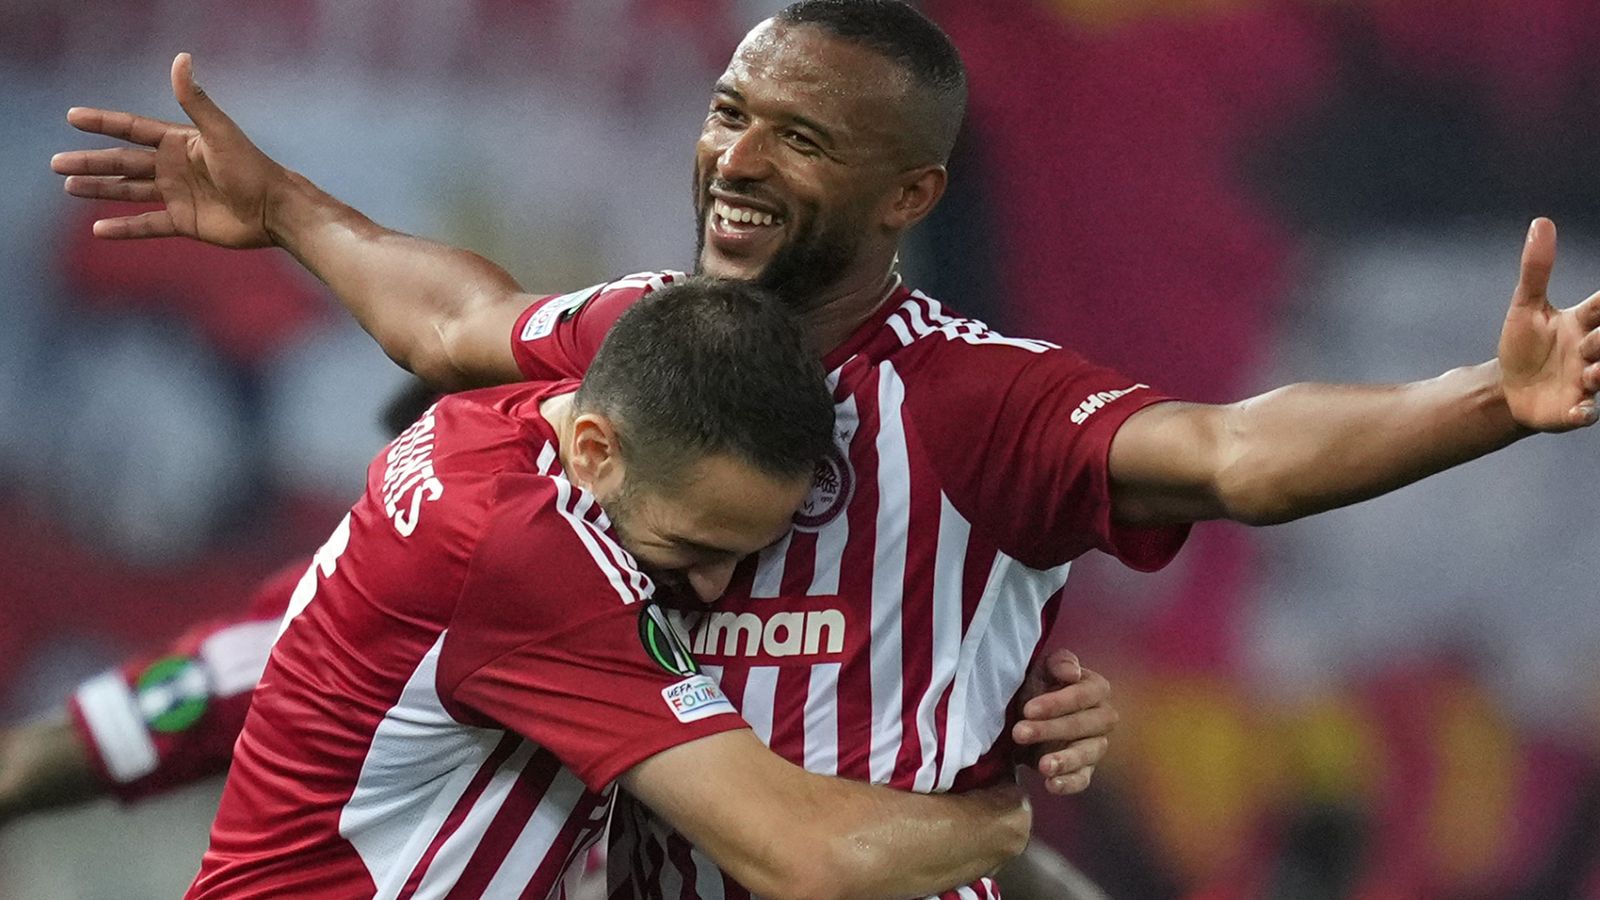 Olympiakos 2-0 Aston Villa (agg 6-2): Unai Emery's side's Conference League dream ended at semi-final stage